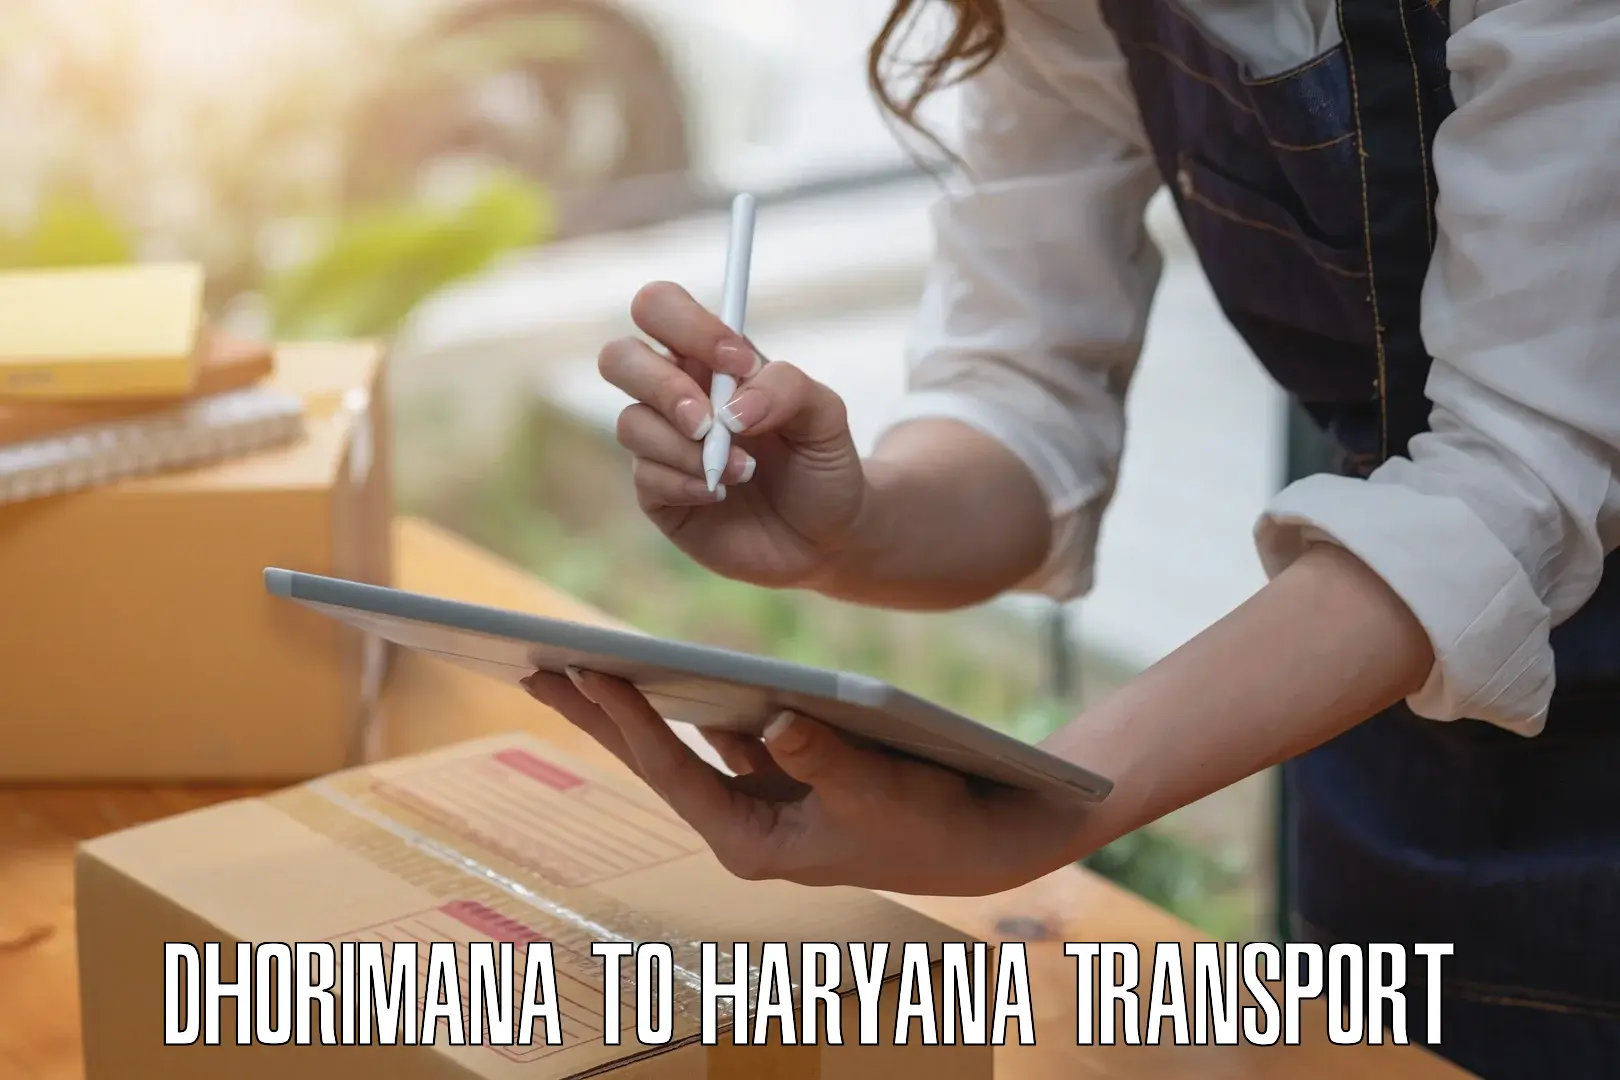 Cargo transportation services in Dhorimana to NCR Haryana